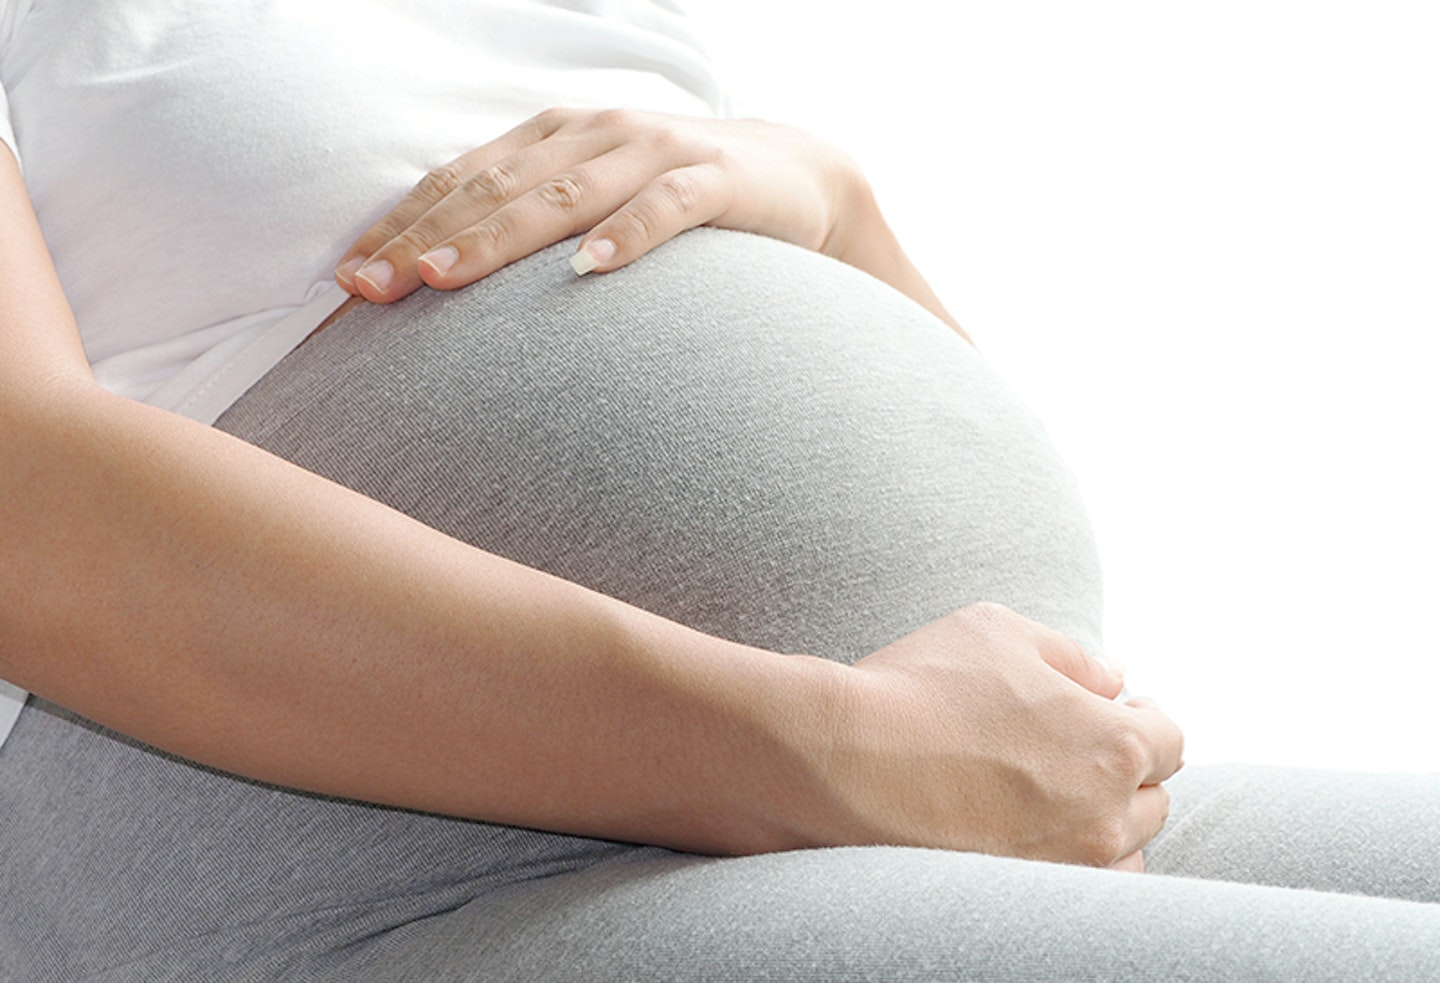 Braxton Hicks contractions: what are they and how to tell the difference